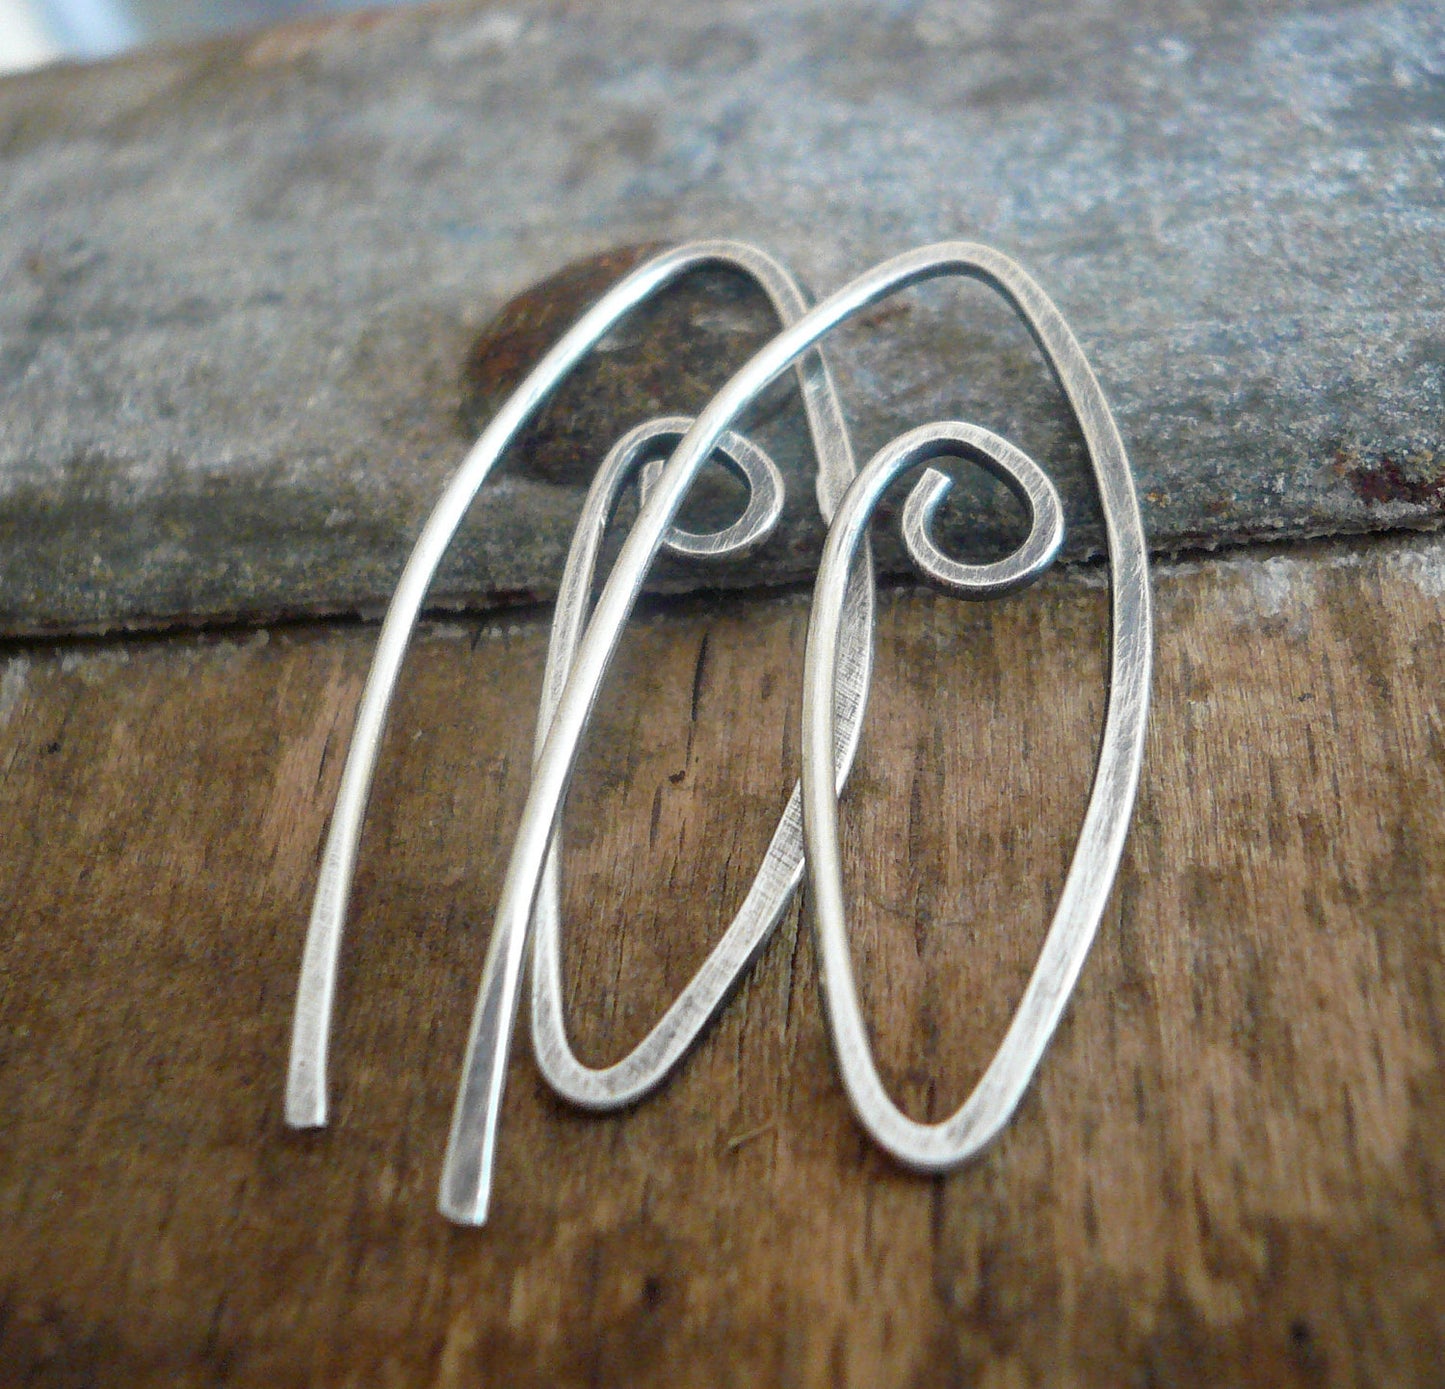 12 Pairs of my Furl Sterling Silver Earwires - Handmade. Handforged. Oxidized & polished